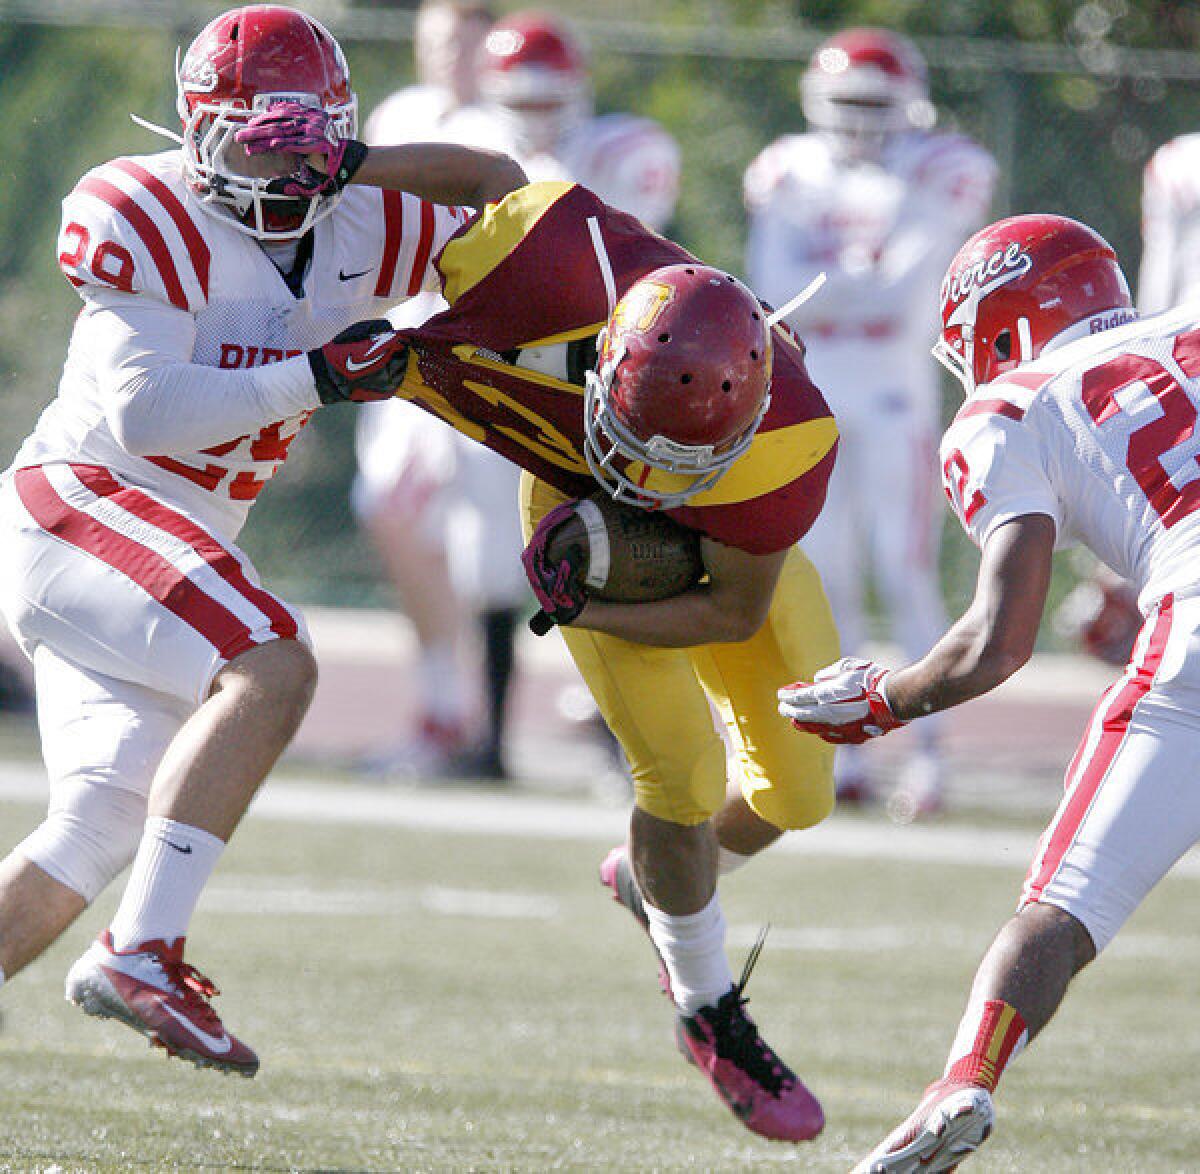 GCC's Walter Moctezuma is tackled during a loss to L.A. Pierce in the final game of the season.